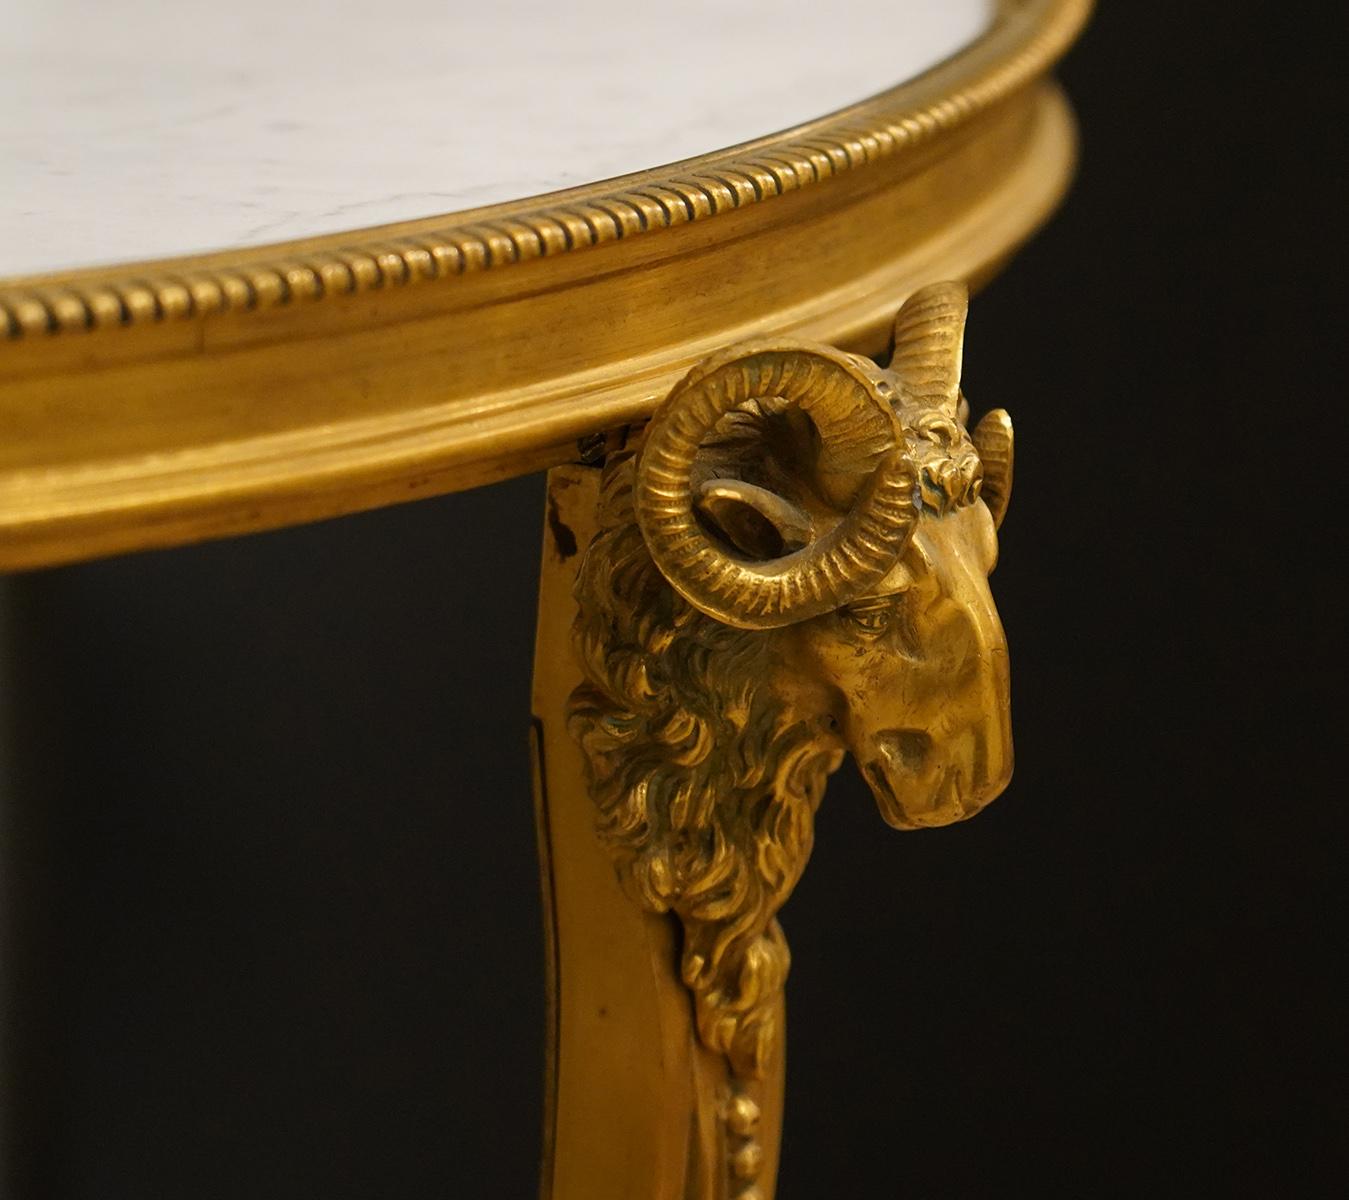 This pair of superior French Louis XV style gilt bronze Guéridon table feature Carrara marble tops set in beaded frames supported by three ram's head adorned gilt bronze cabriole legs ending in foliate hoof feet. The legs are joined by lower marble